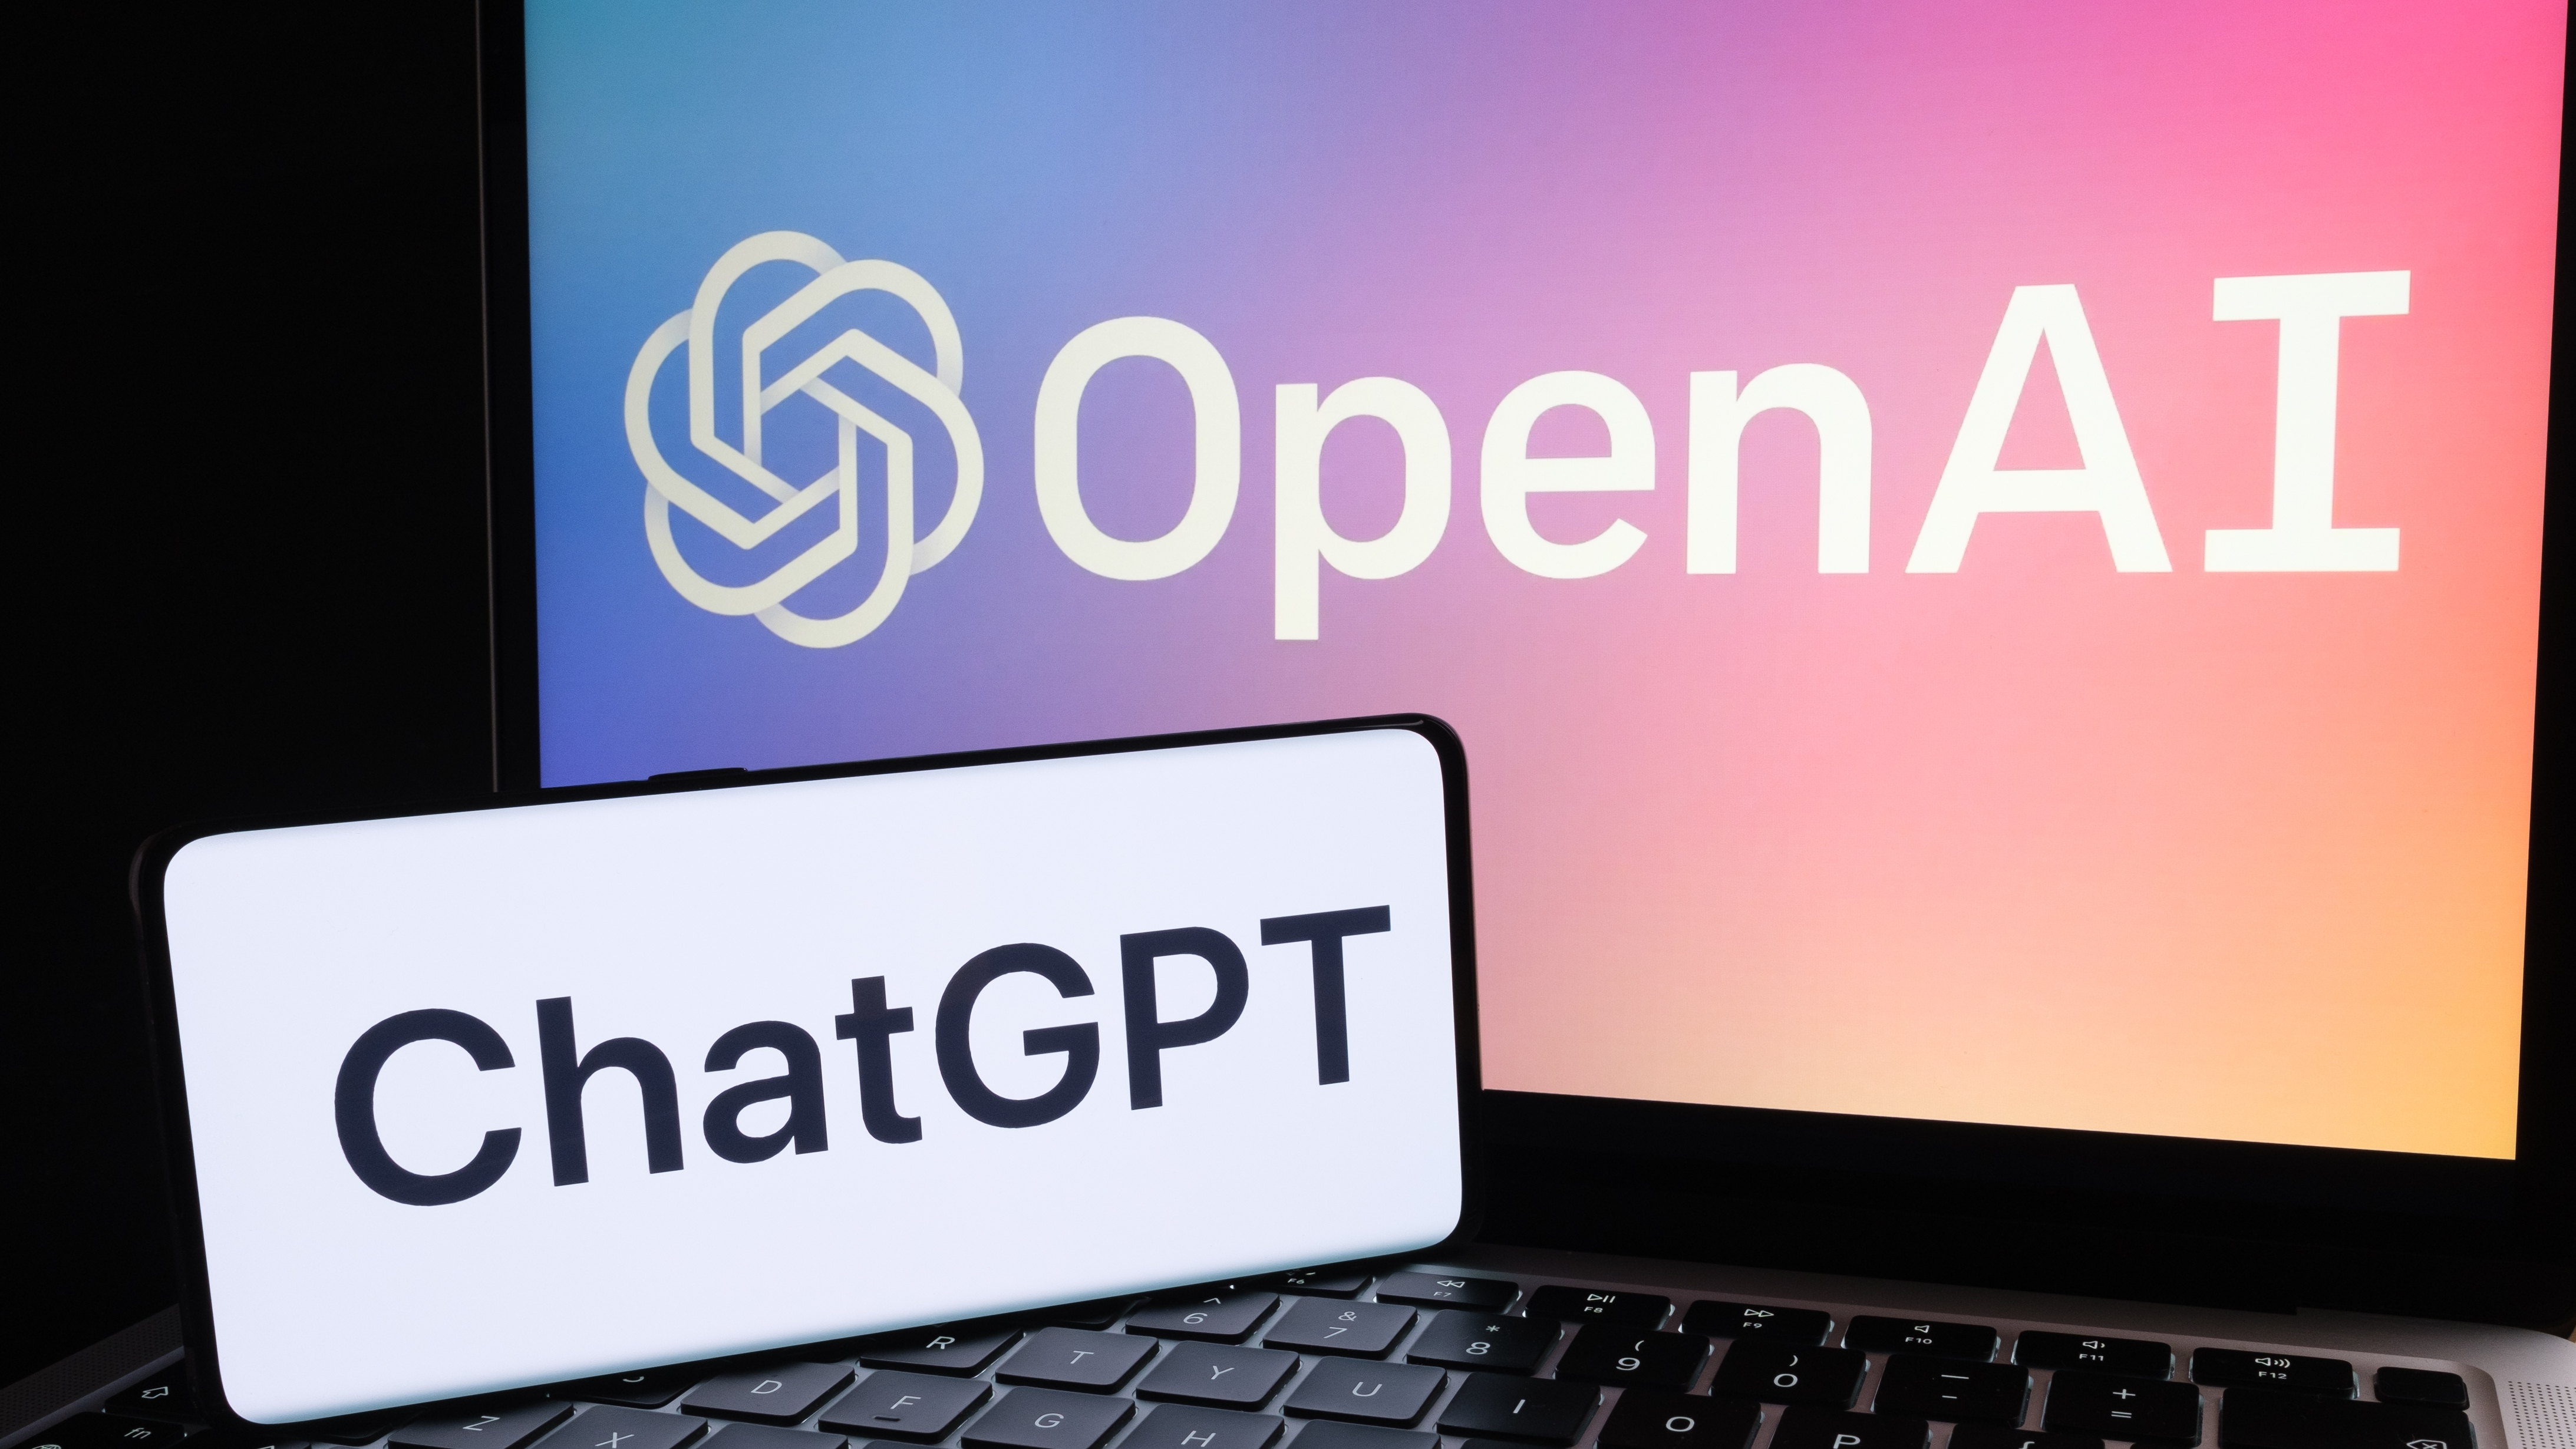 A phone with the ChatGPT logo and a laptop with the OpenAI logo